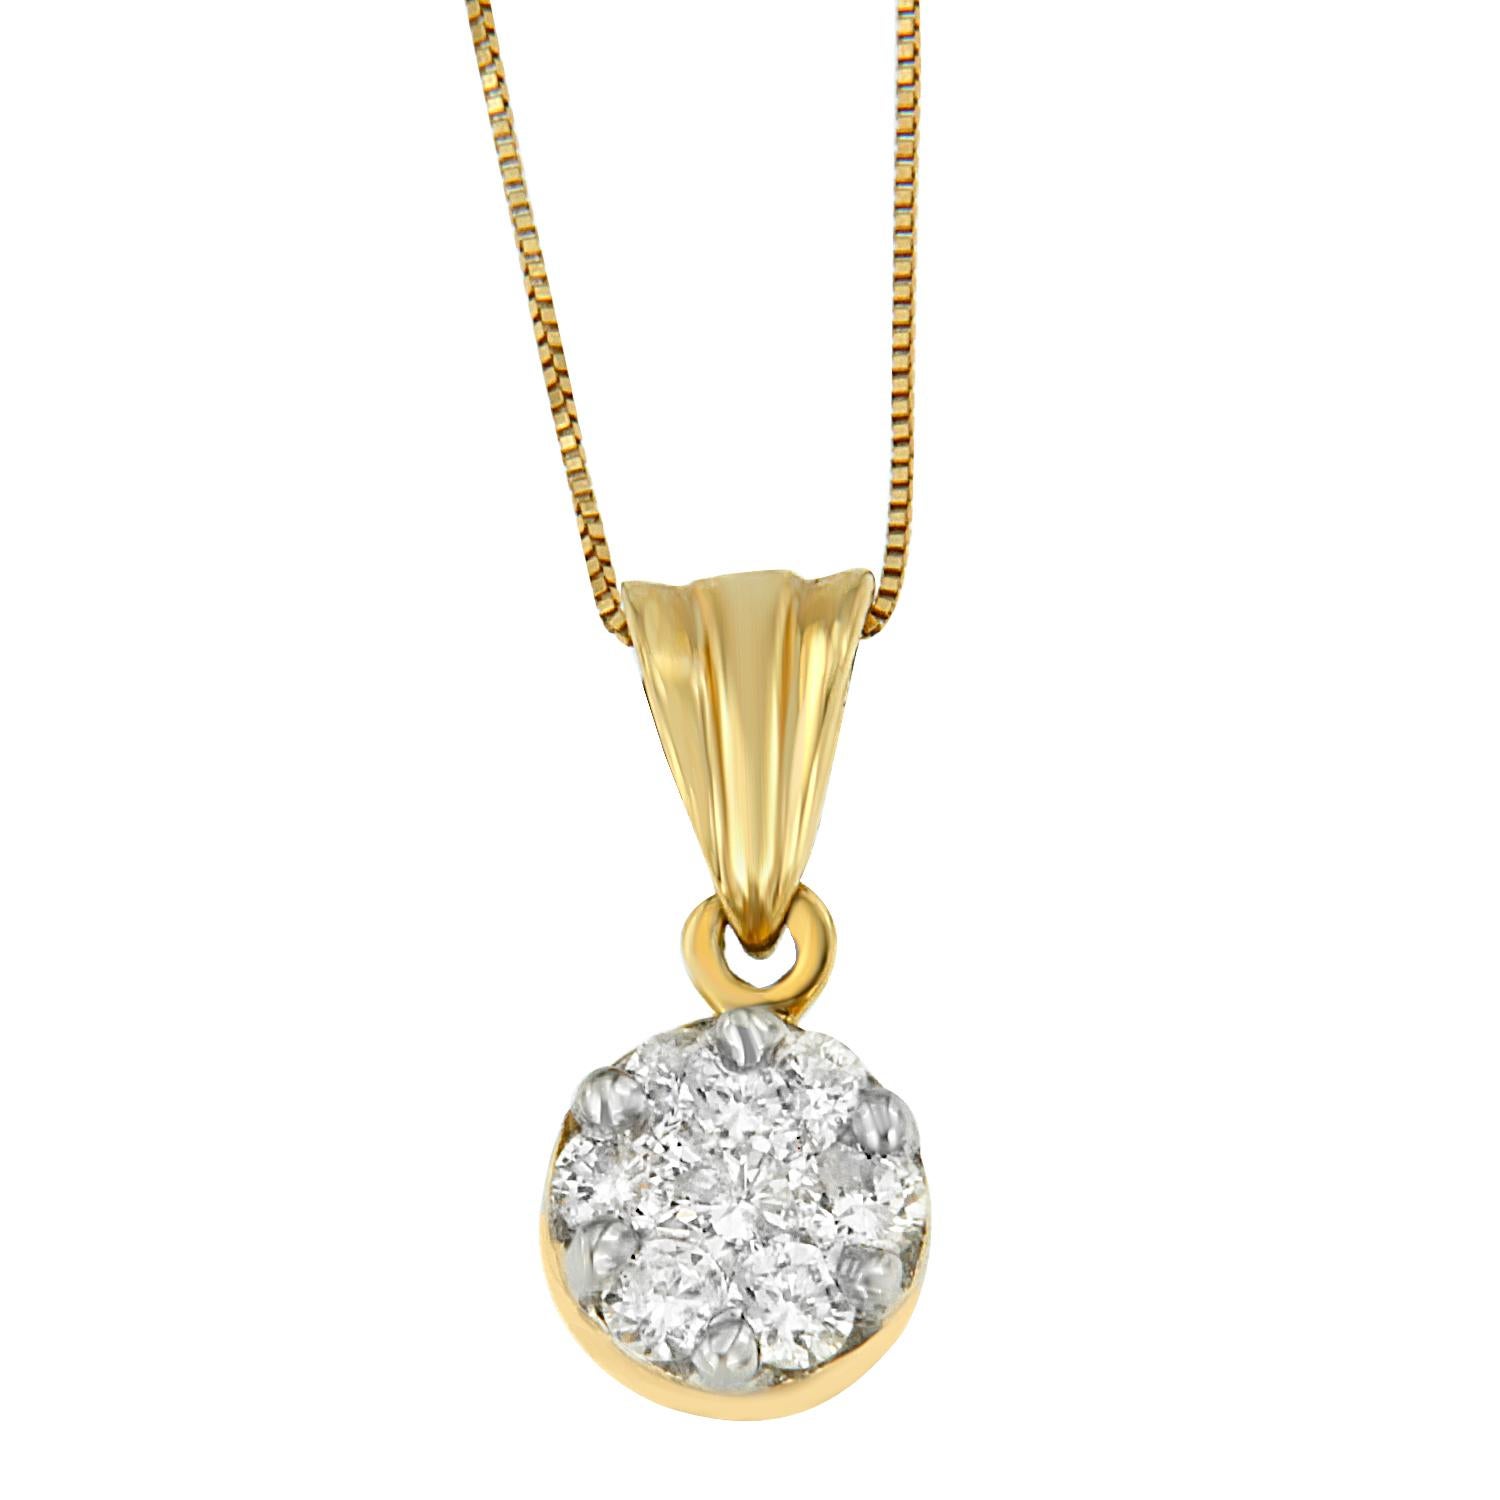 Simple yet stunning, this circle pendant is filled with a burst of round cut diamonds that catch the light at every angle. Set in 14 karat yellow gold for a polished finish, it's a style that shines, day or night. This beautiful necklace includes